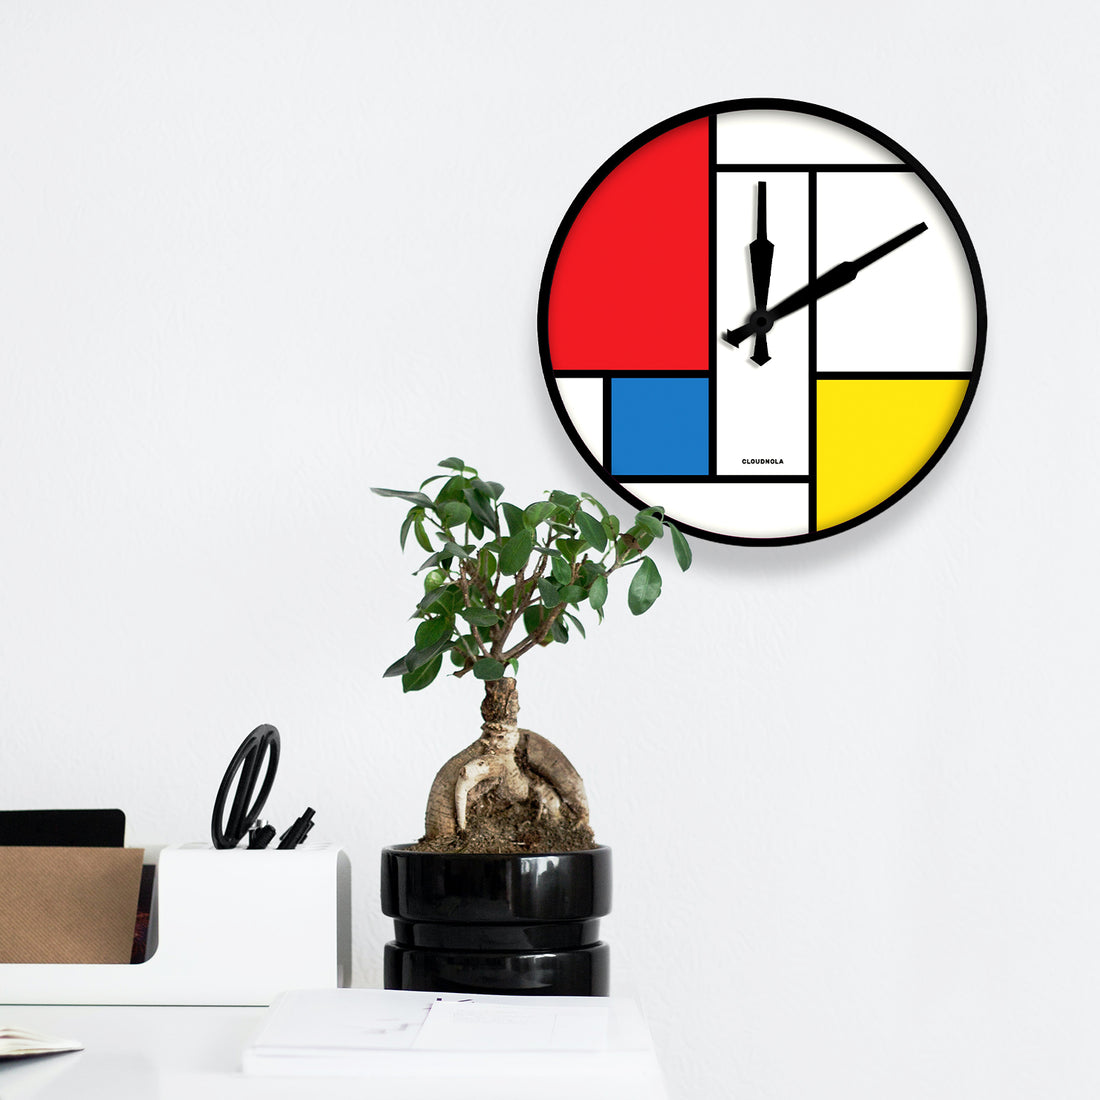 Mondrian and the Clock: The Intersection of Art and Timekeeping